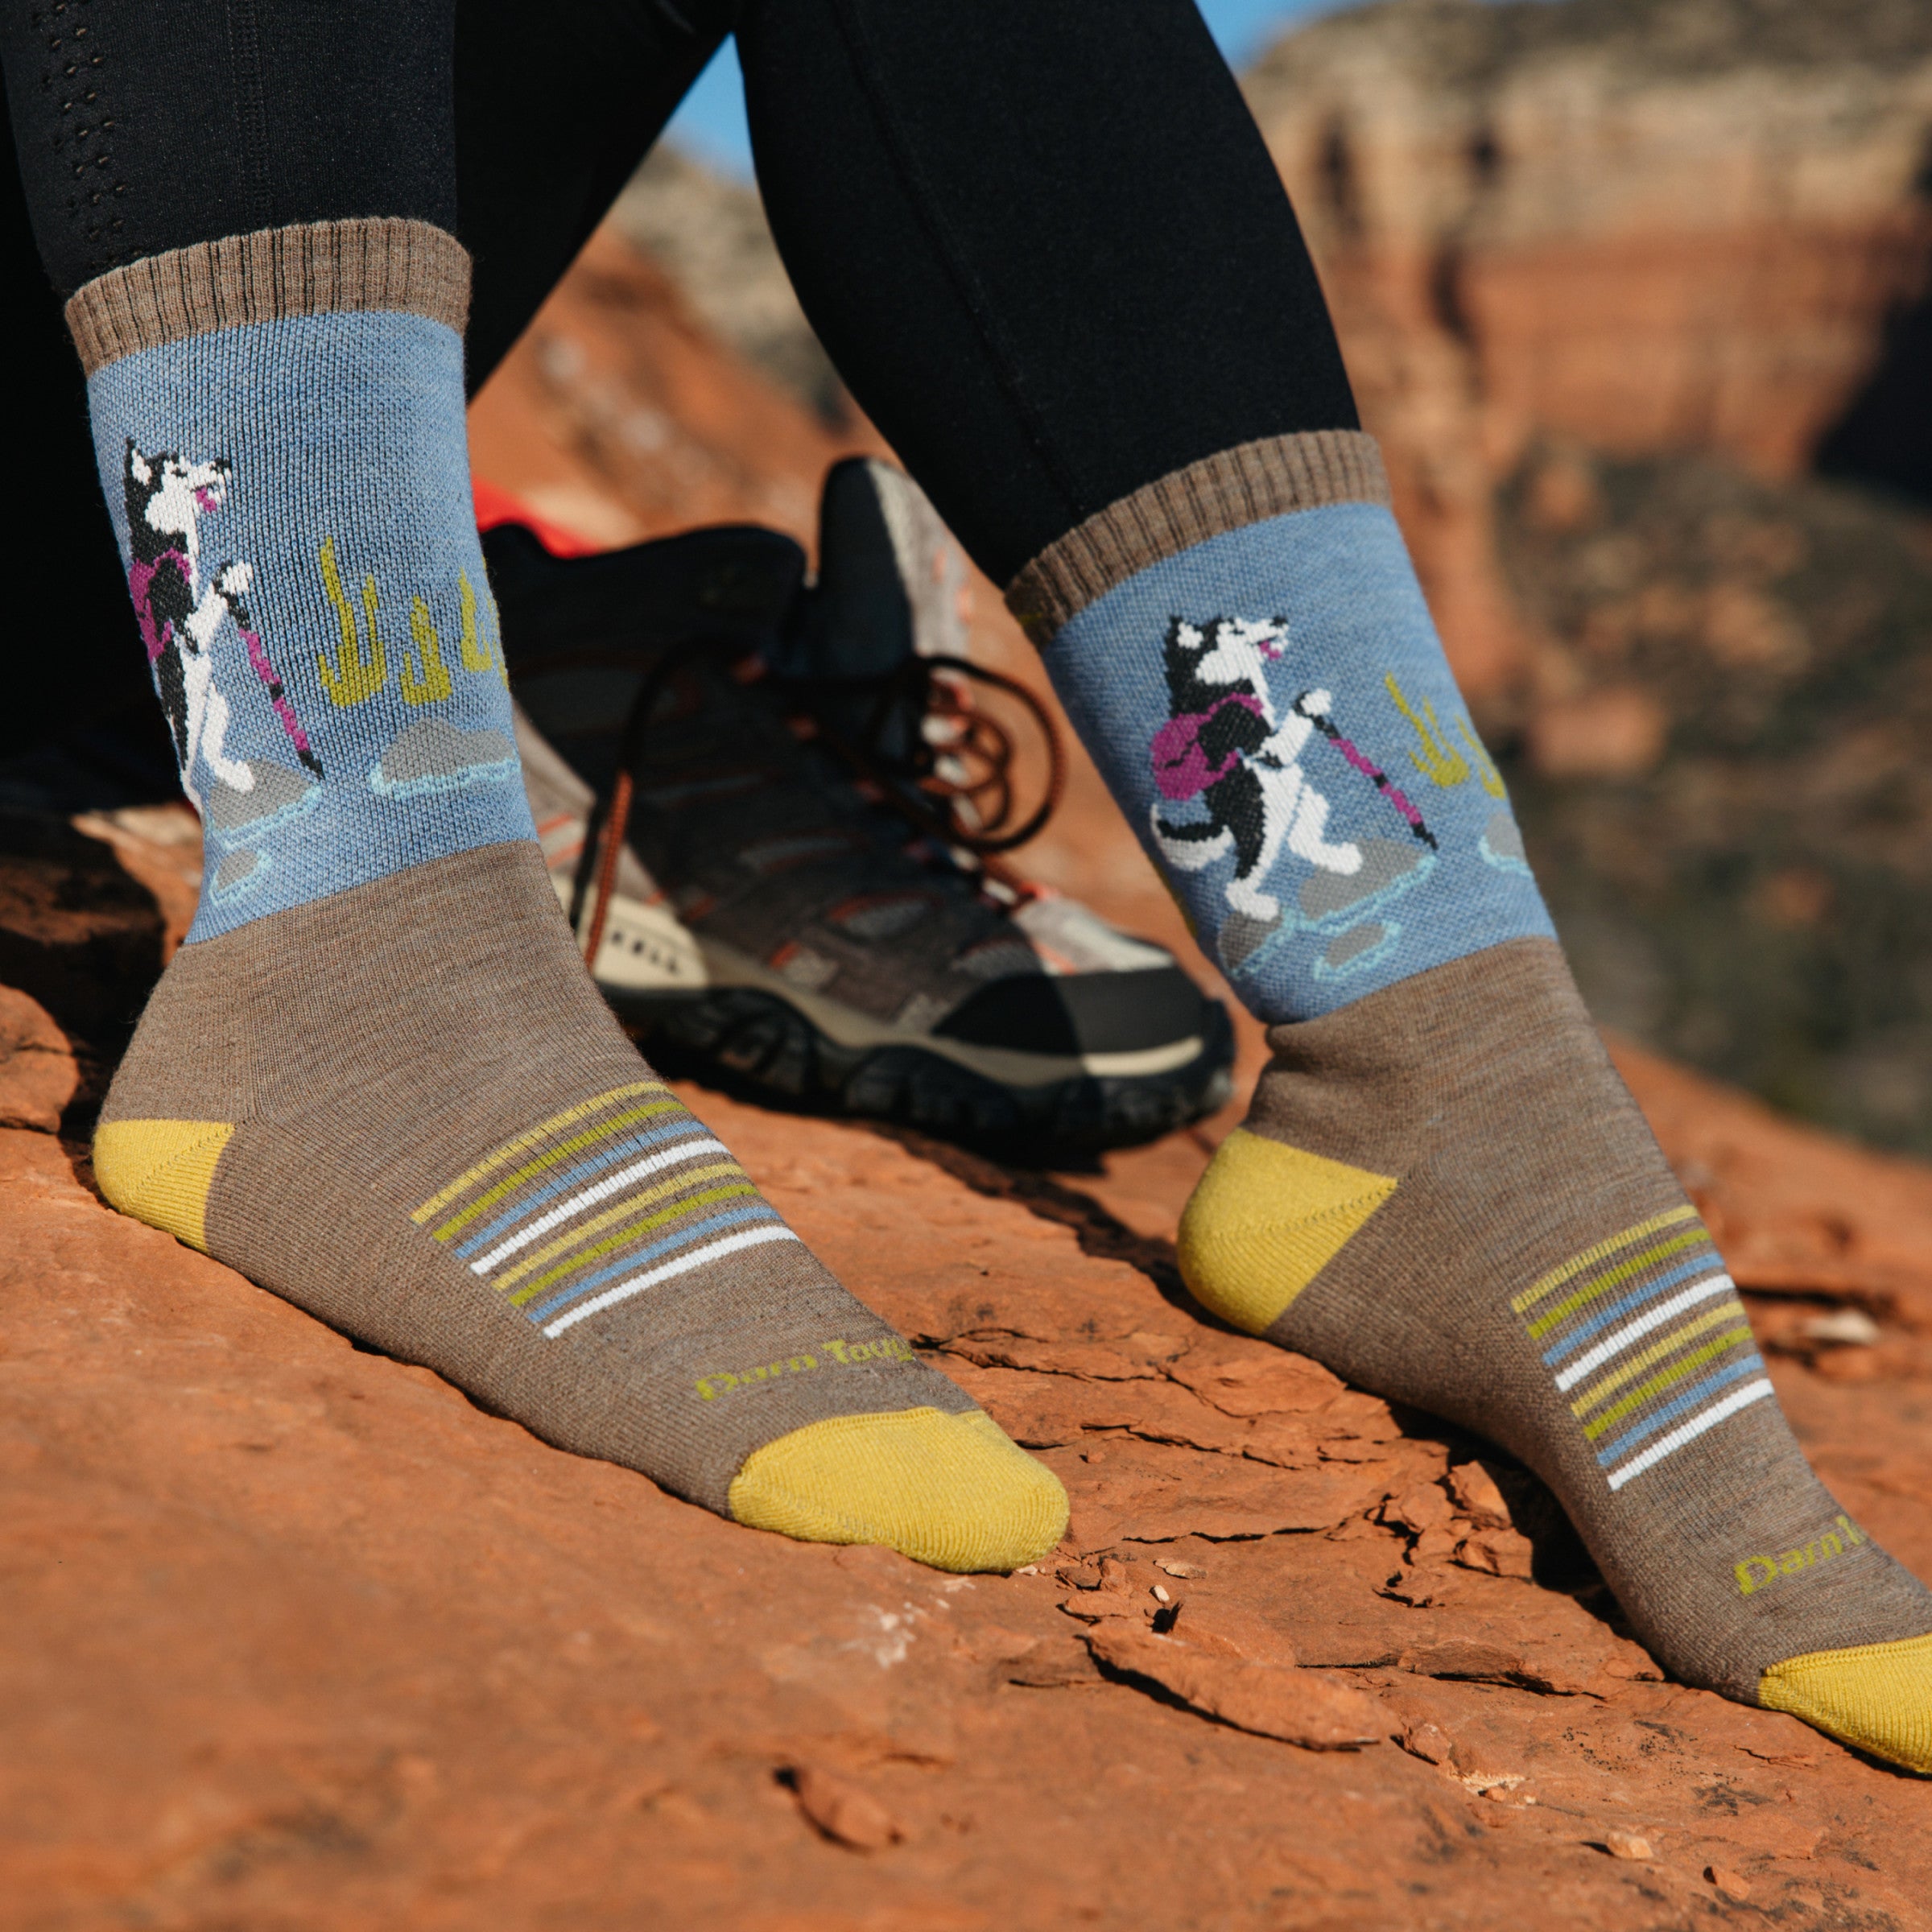 Model wearing 5001 socks in Bark colorway with hiking husky illustration facing outwards without shoes against red desert rock.